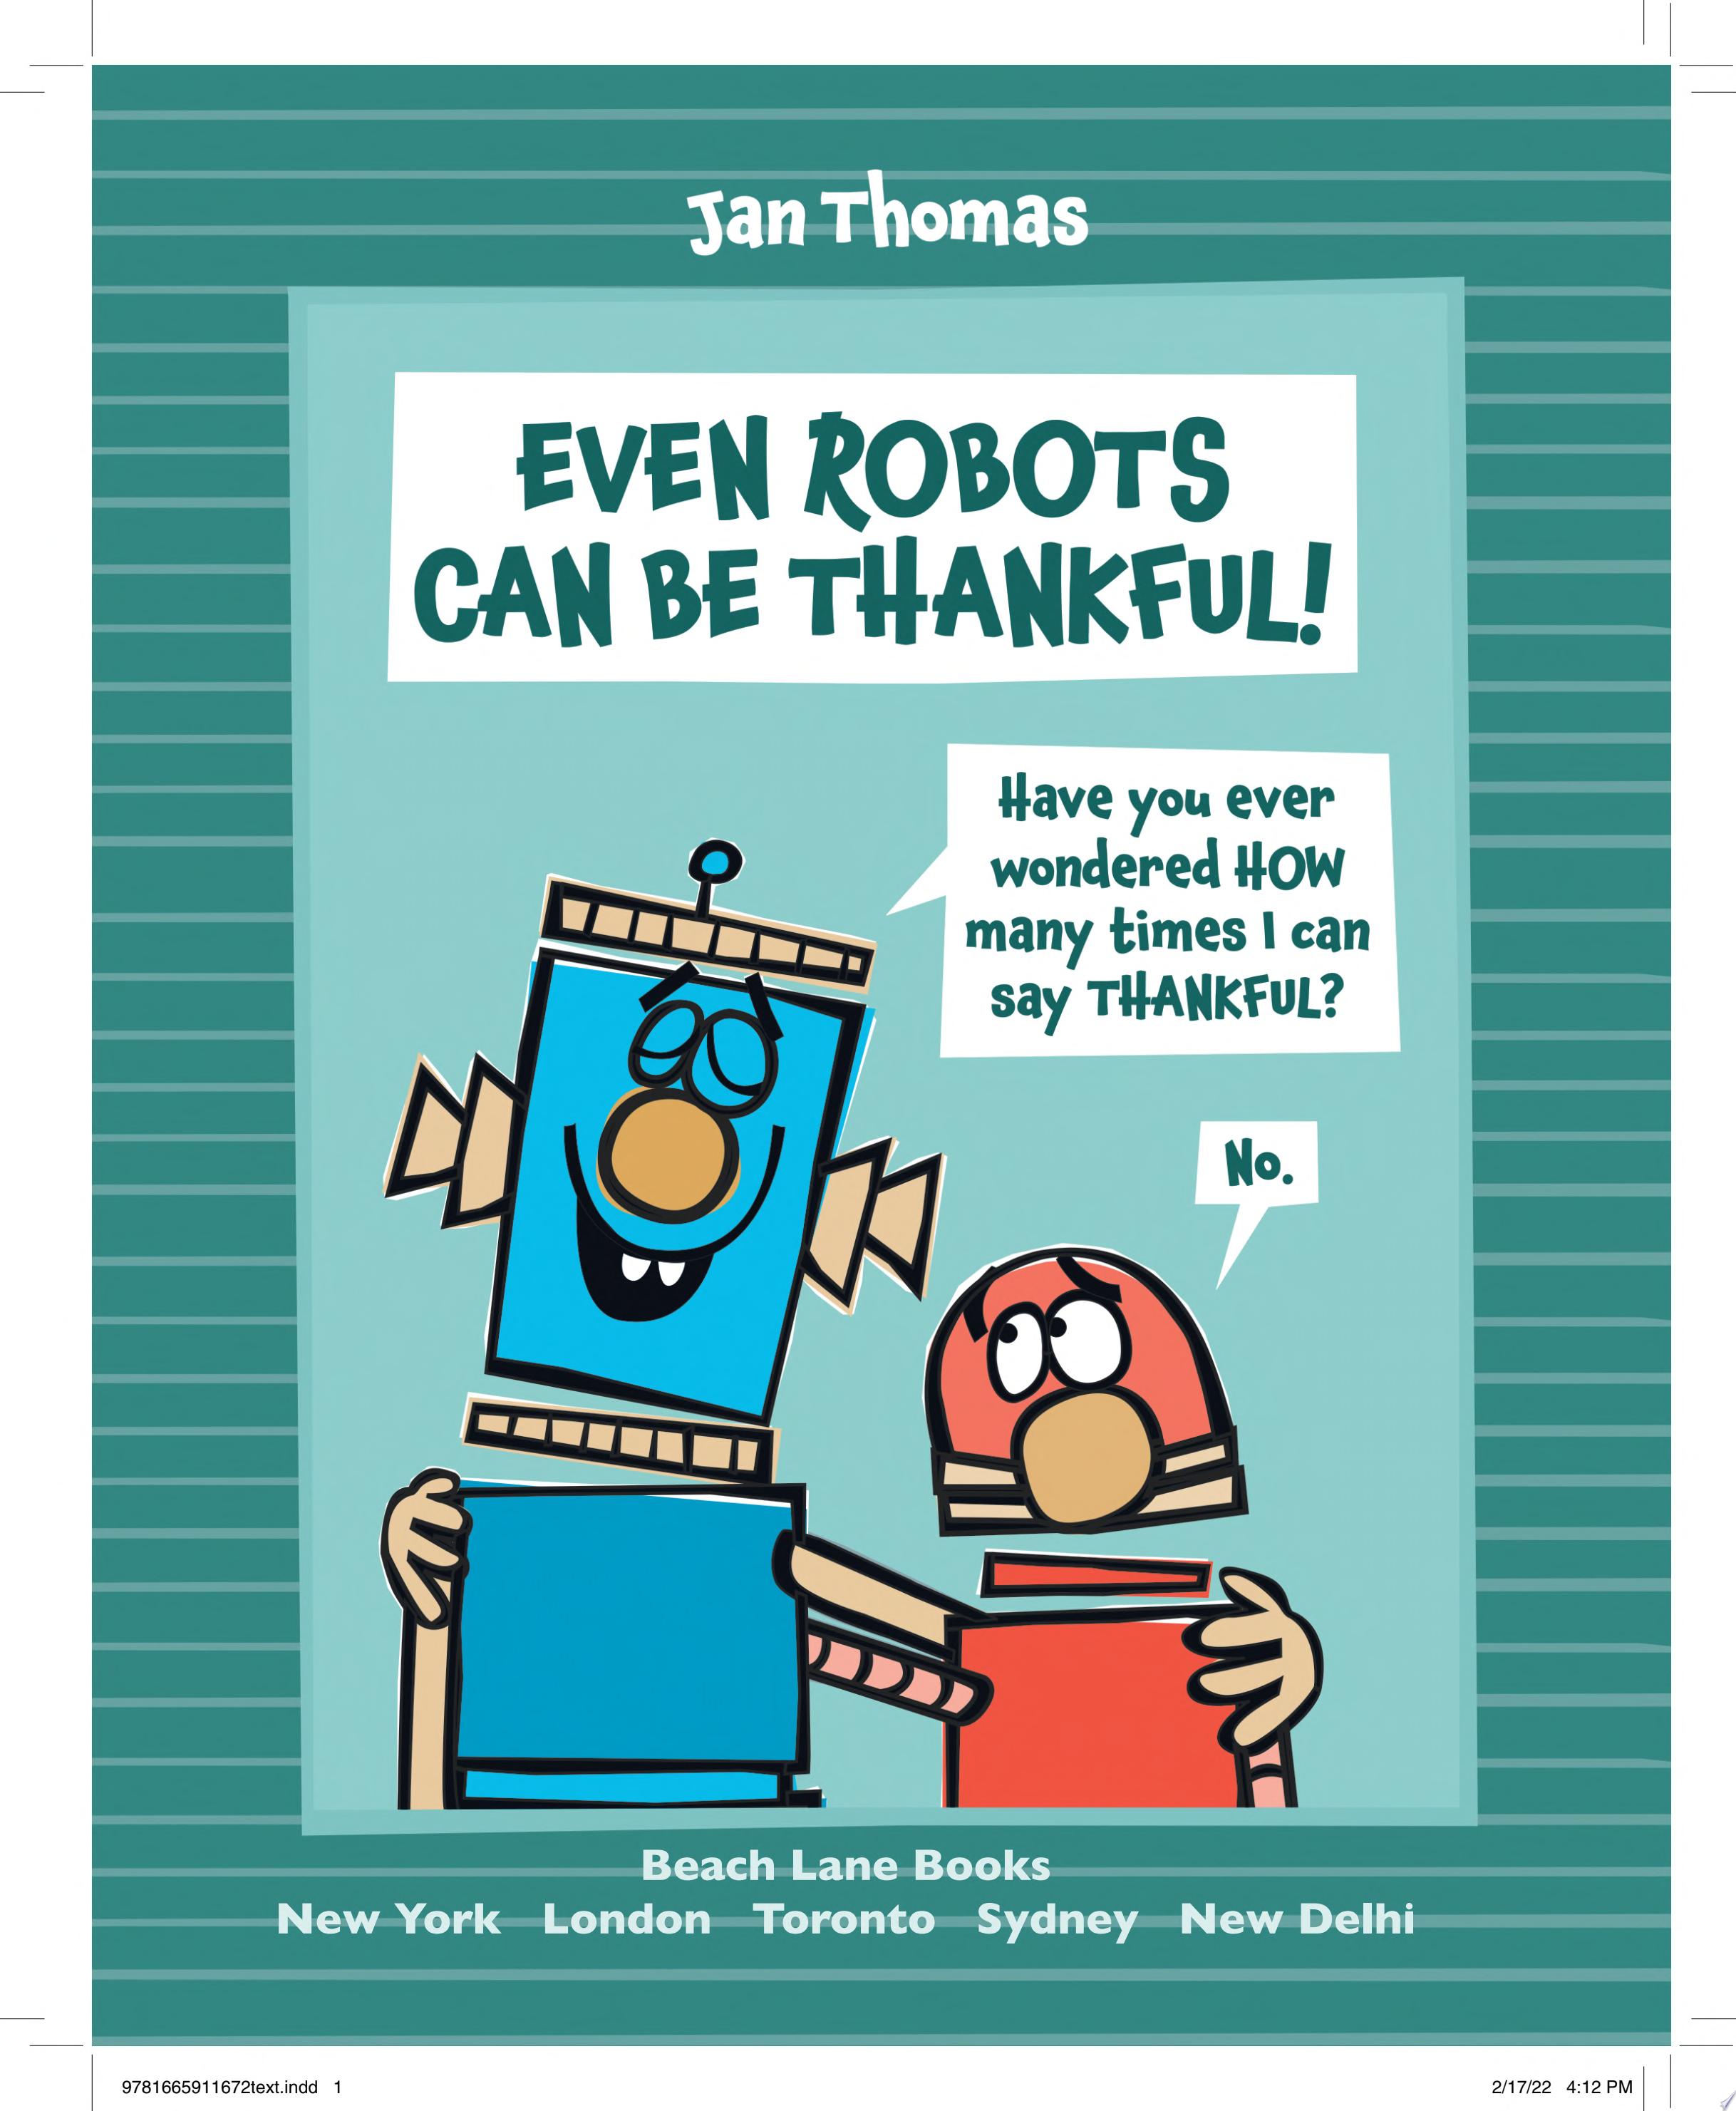 Image for "Even Robots Can Be Thankful!"